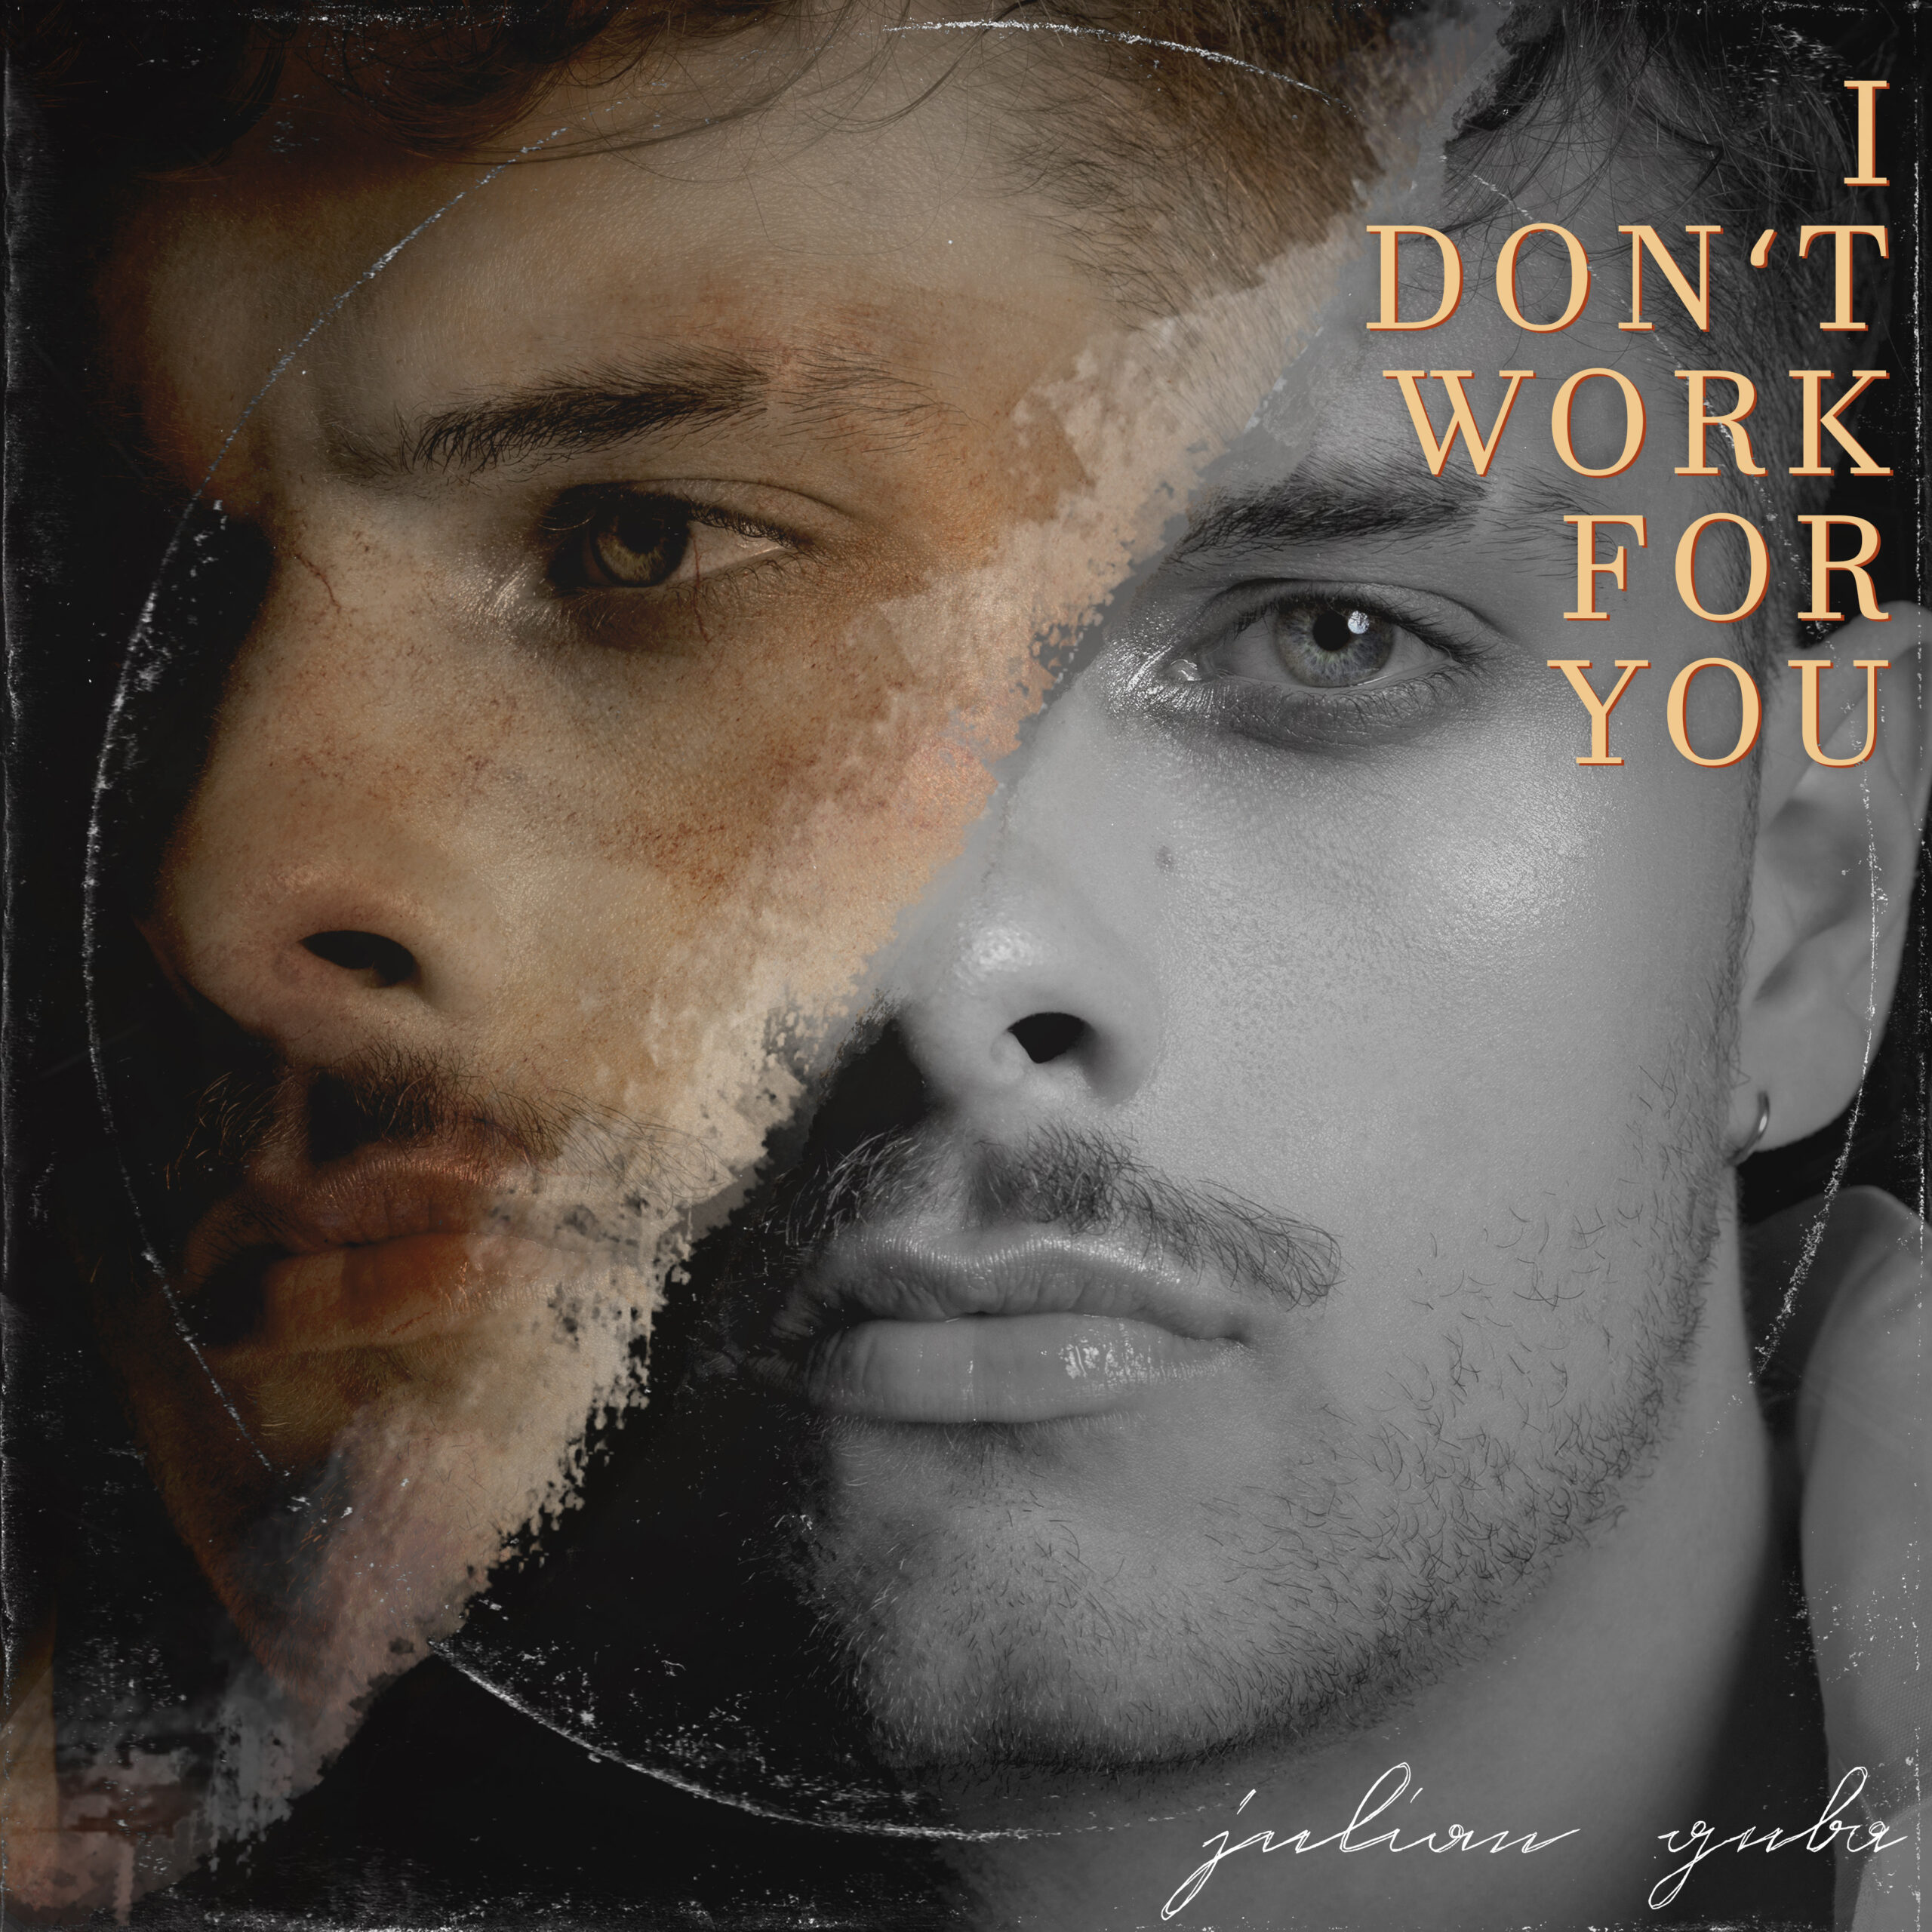 JULIAN GUBA’s New Electronic Dance-Pop Release “I Don’t Work For You” – Empowering Anthem of Independence